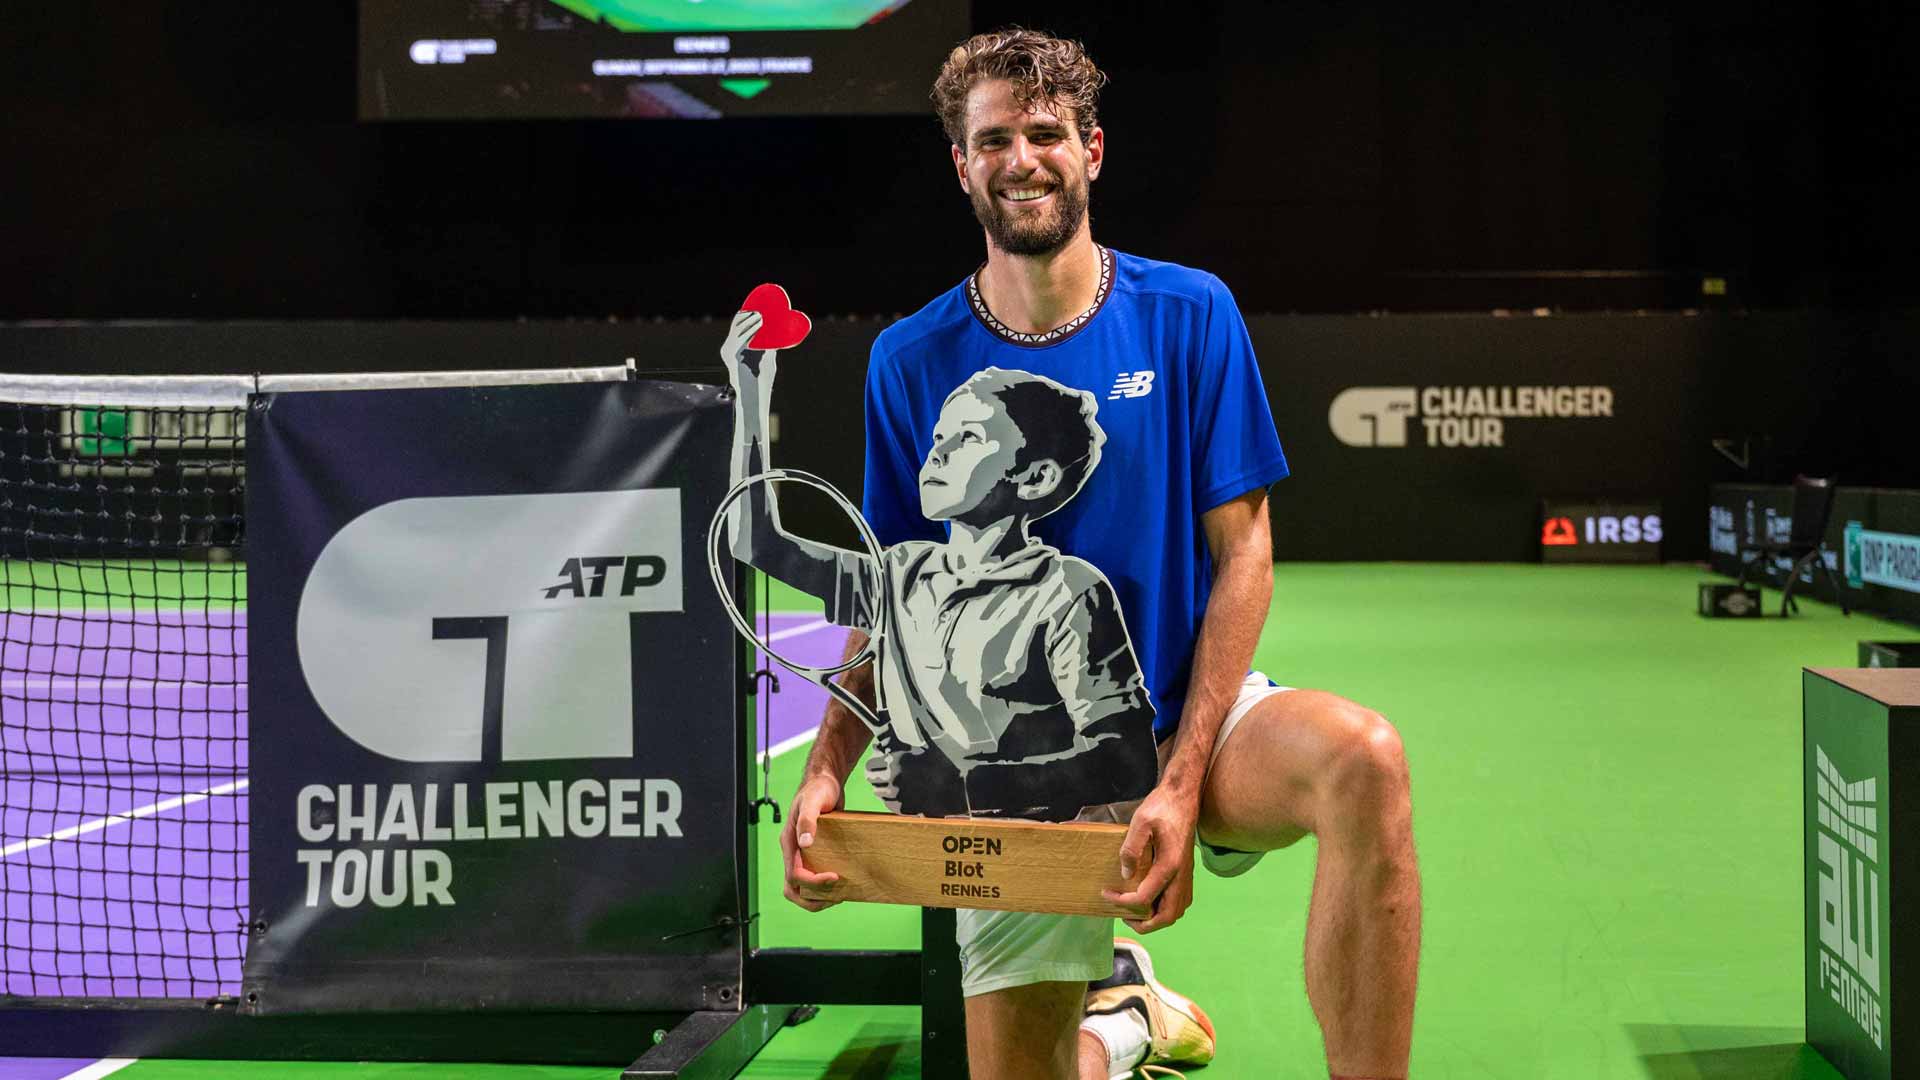 <a href='https://www.atptour.com/en/players/maxime-cressy/c0bc/overview'>Maxime Cressy</a> wins the Challenger 100 event in Rennes, France.